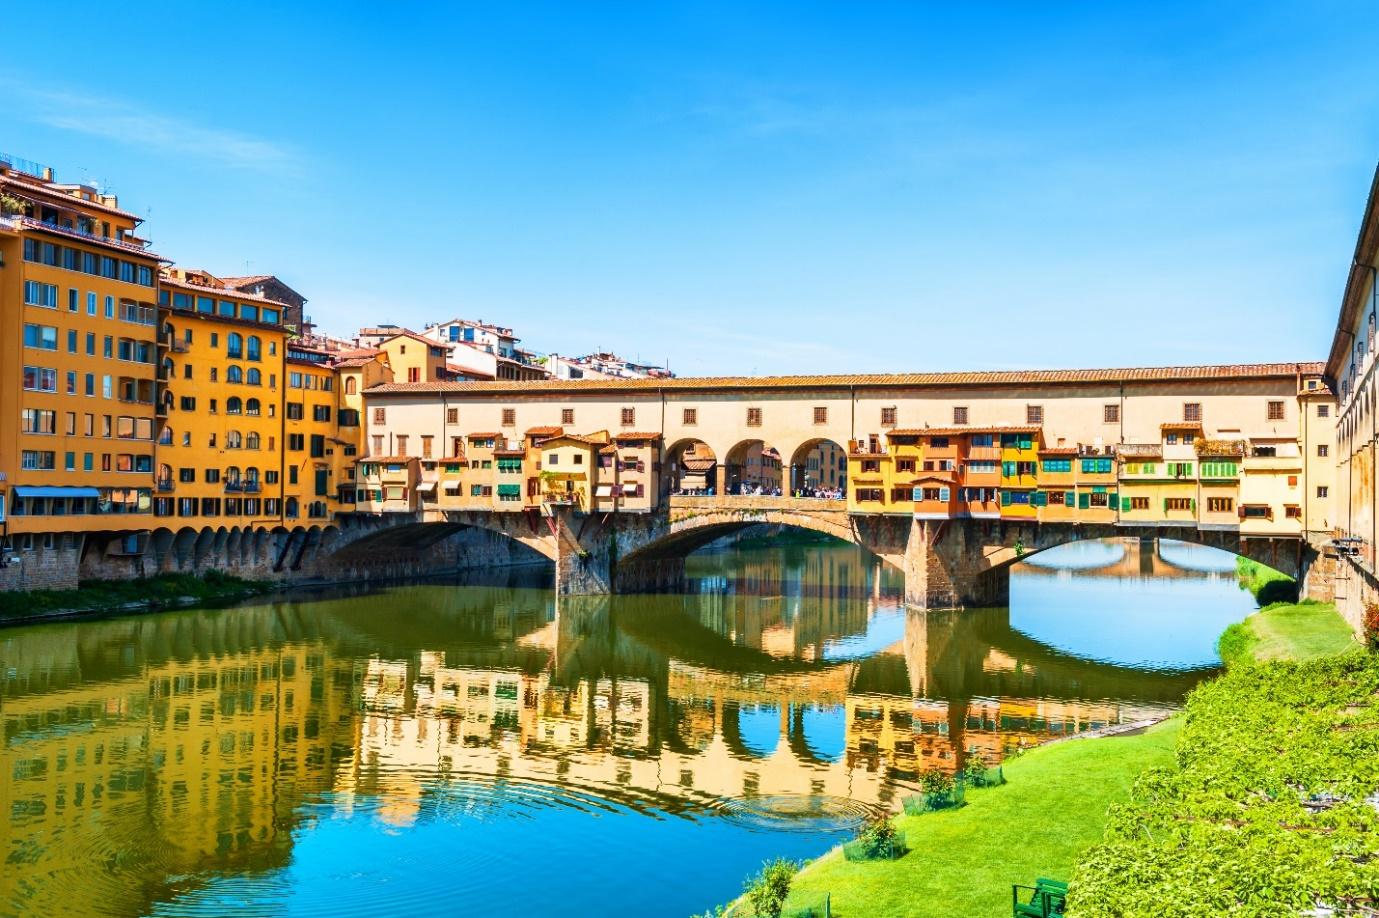 Ponte Vecchio over water with buildings and a body of water

Description automatically generated